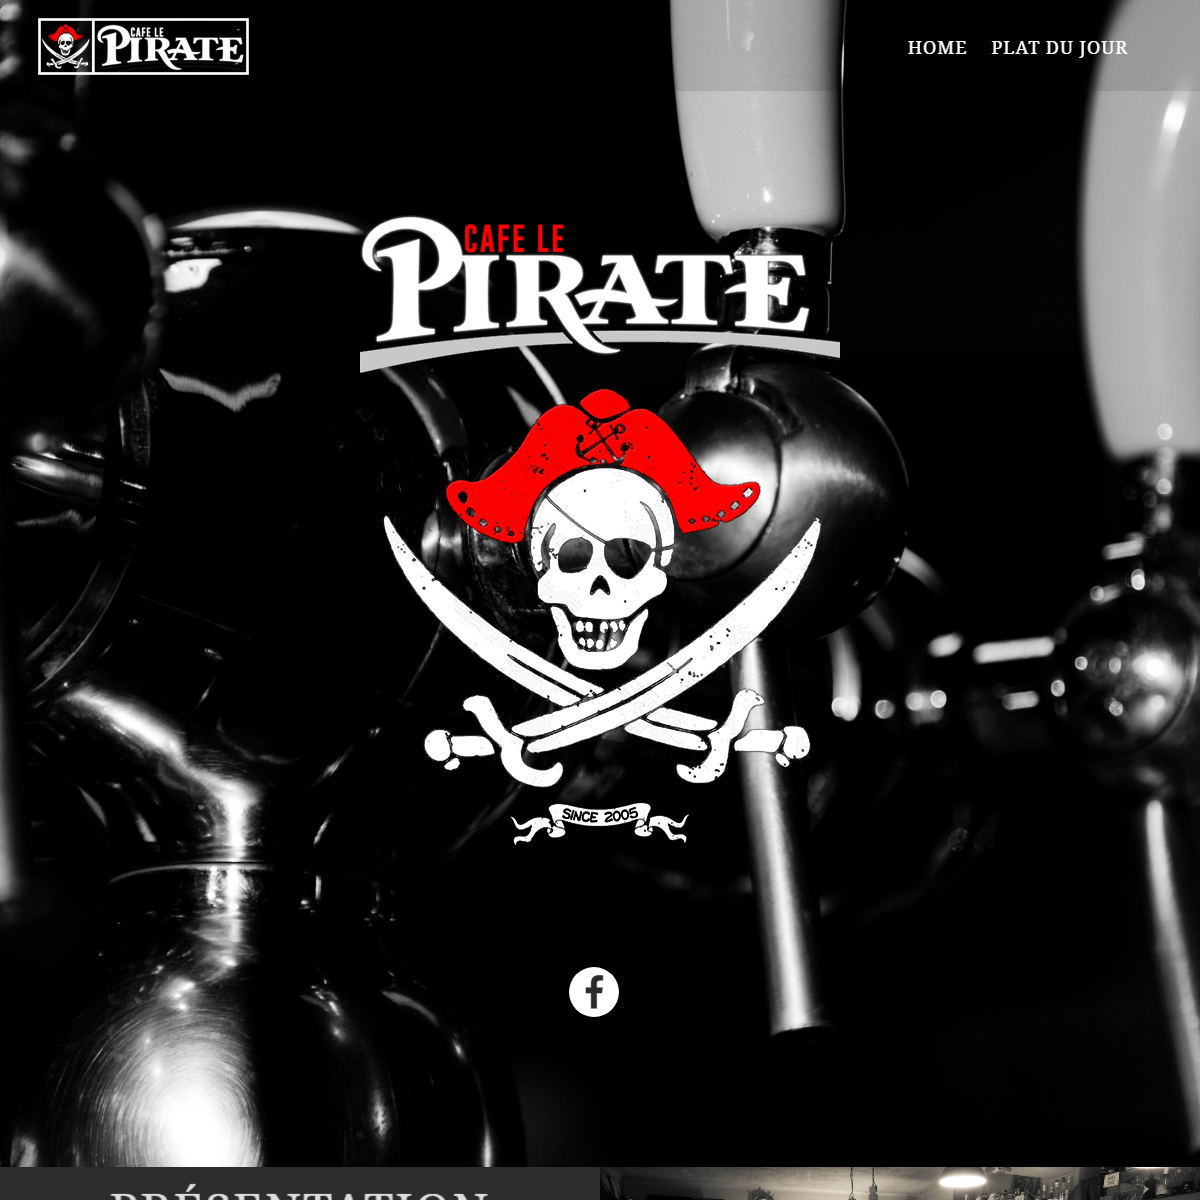 A complete backup of https://pirate.lu/